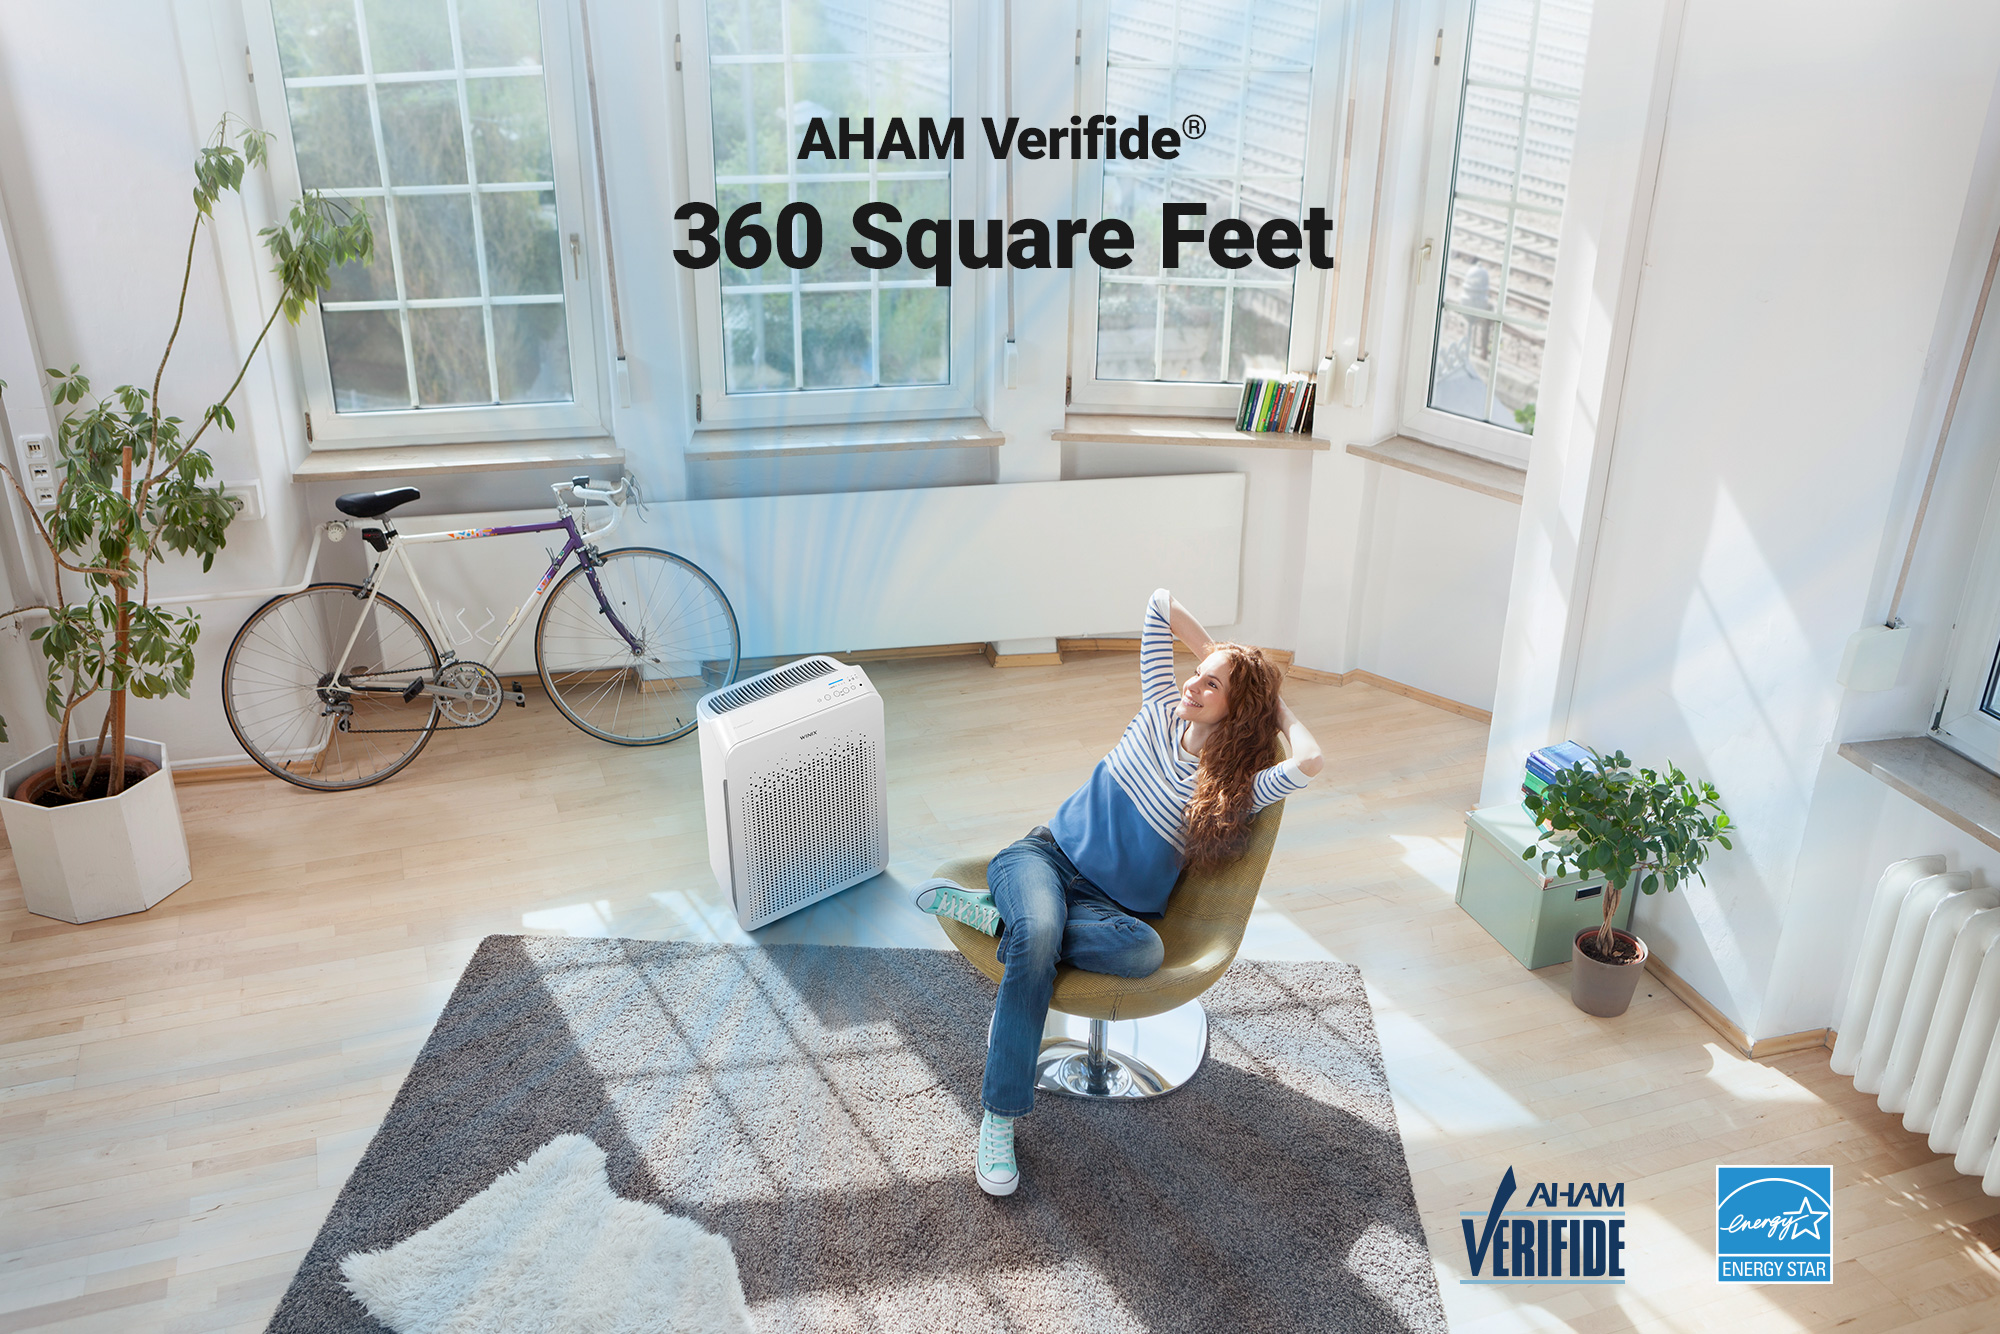 C545 air purifier on floor next to woman sitting in living room and text saying AHAM Verified for 360 Square Feet